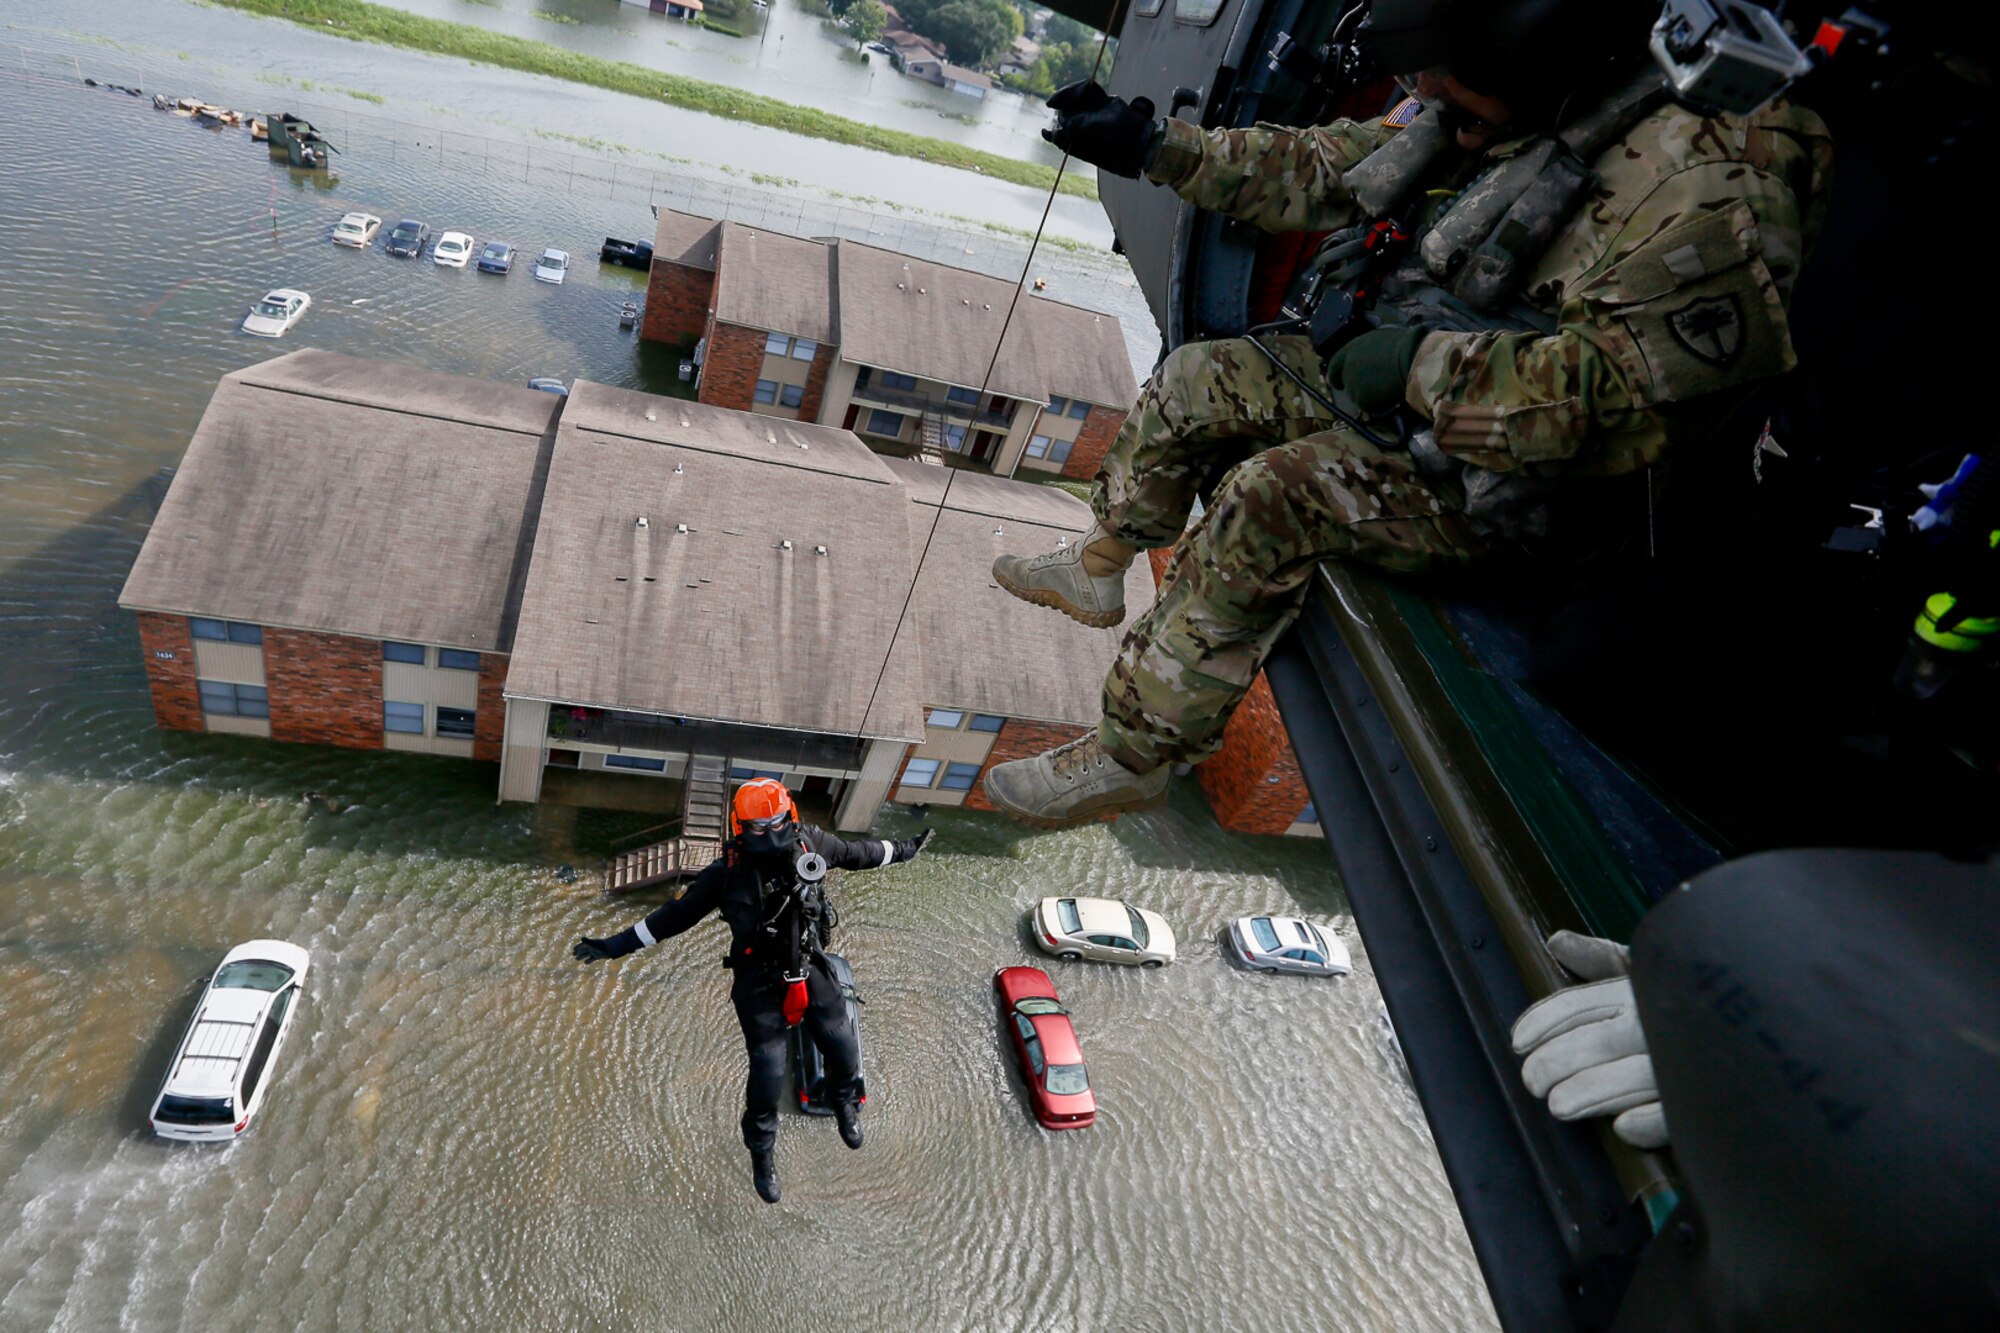 Rescue operations in flooded area of Southeast Texas